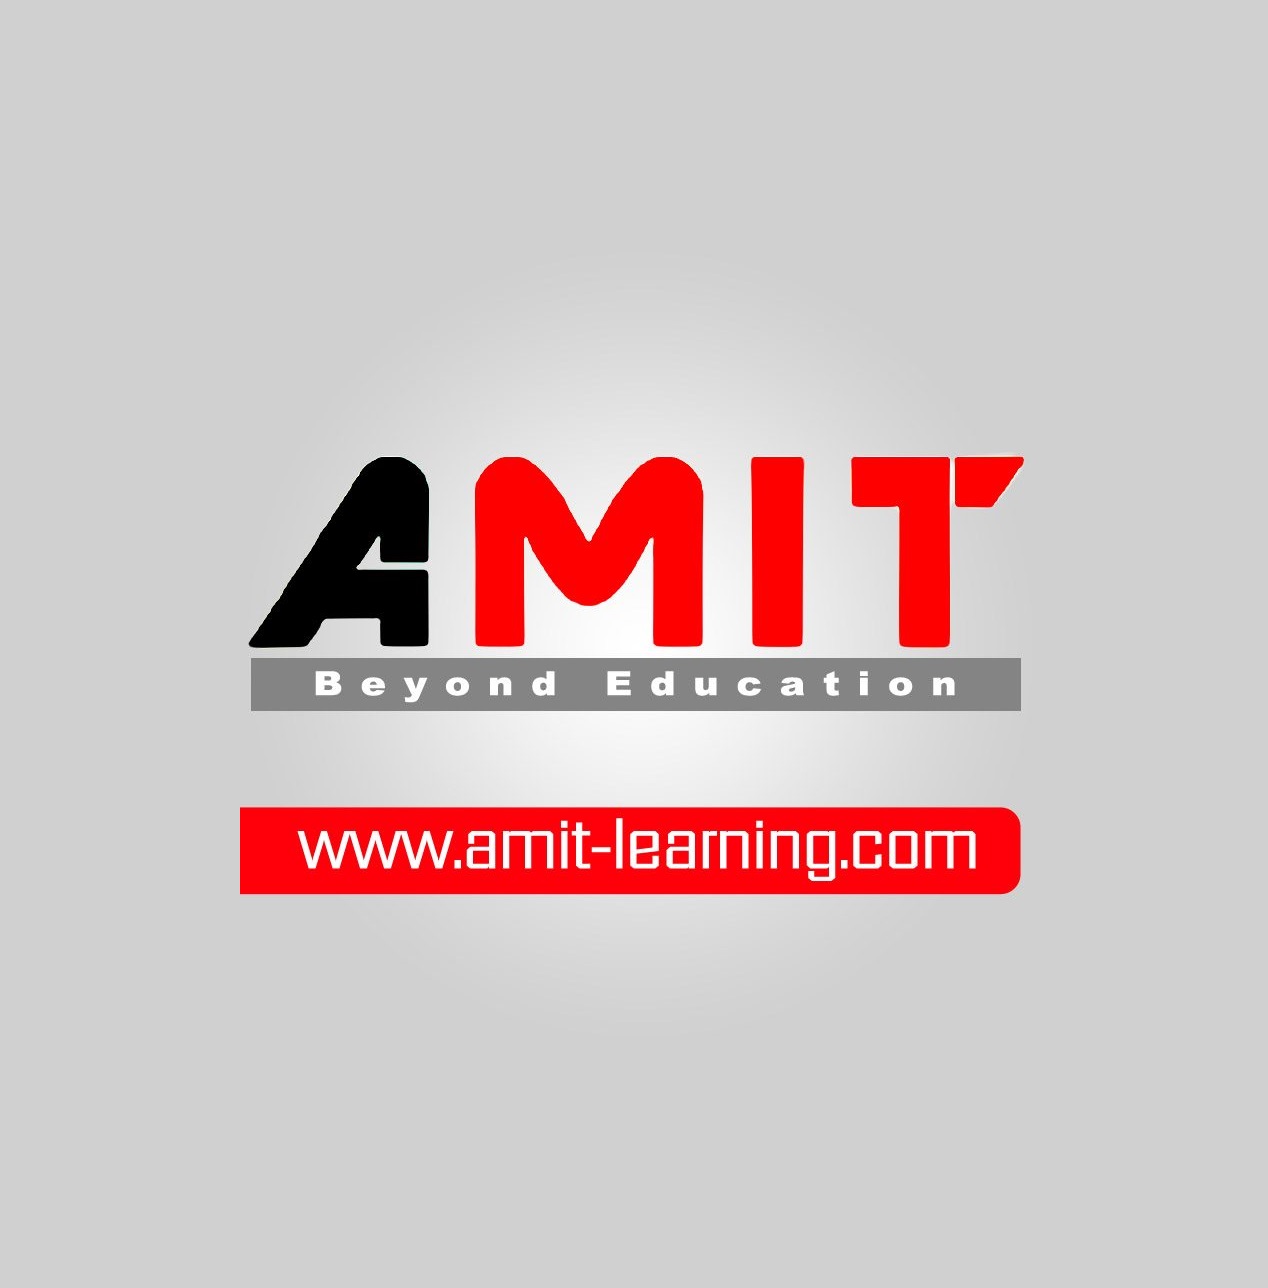 AMIT Learning